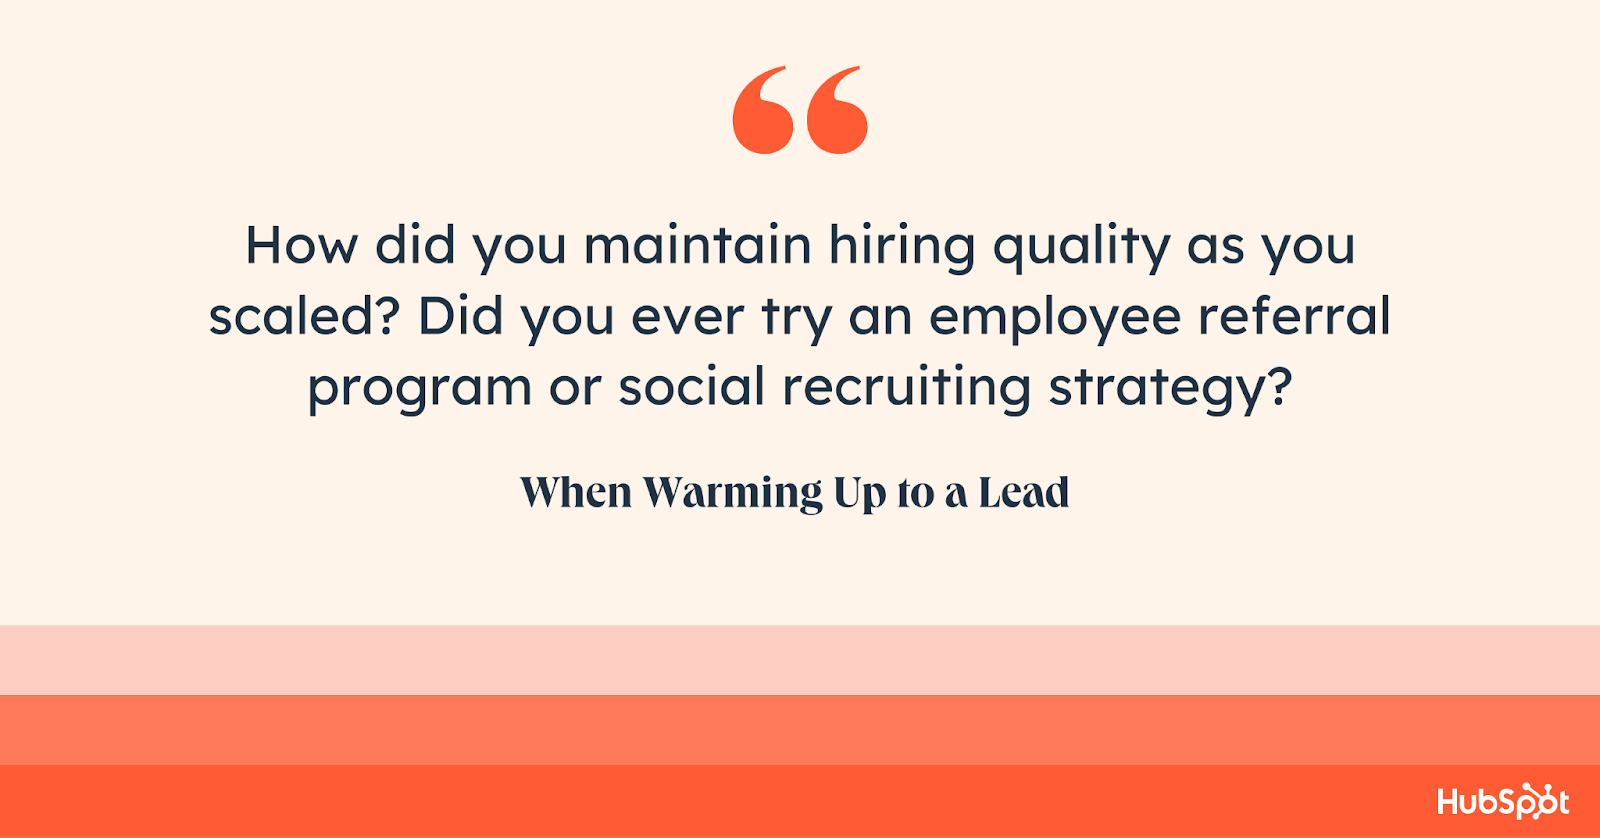 how to end an email when warming up a lead. How did you maintain hiring quality as you scaled? Did you ever try an employee referral program or social recruiting strategy?